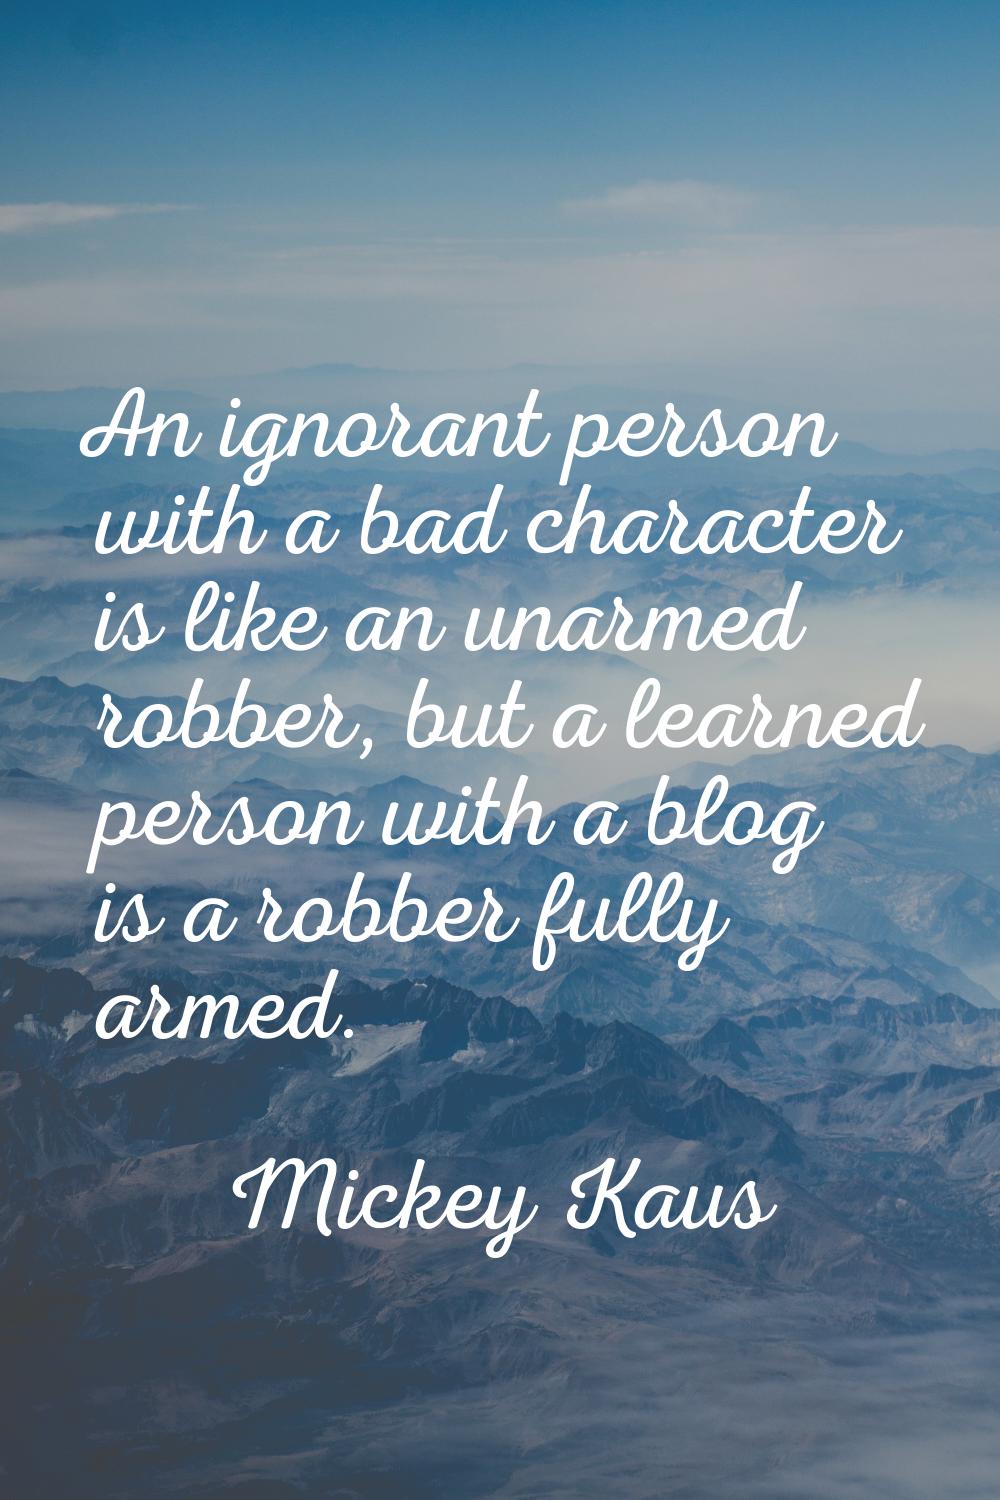 An ignorant person with a bad character is like an unarmed robber, but a learned person with a blog